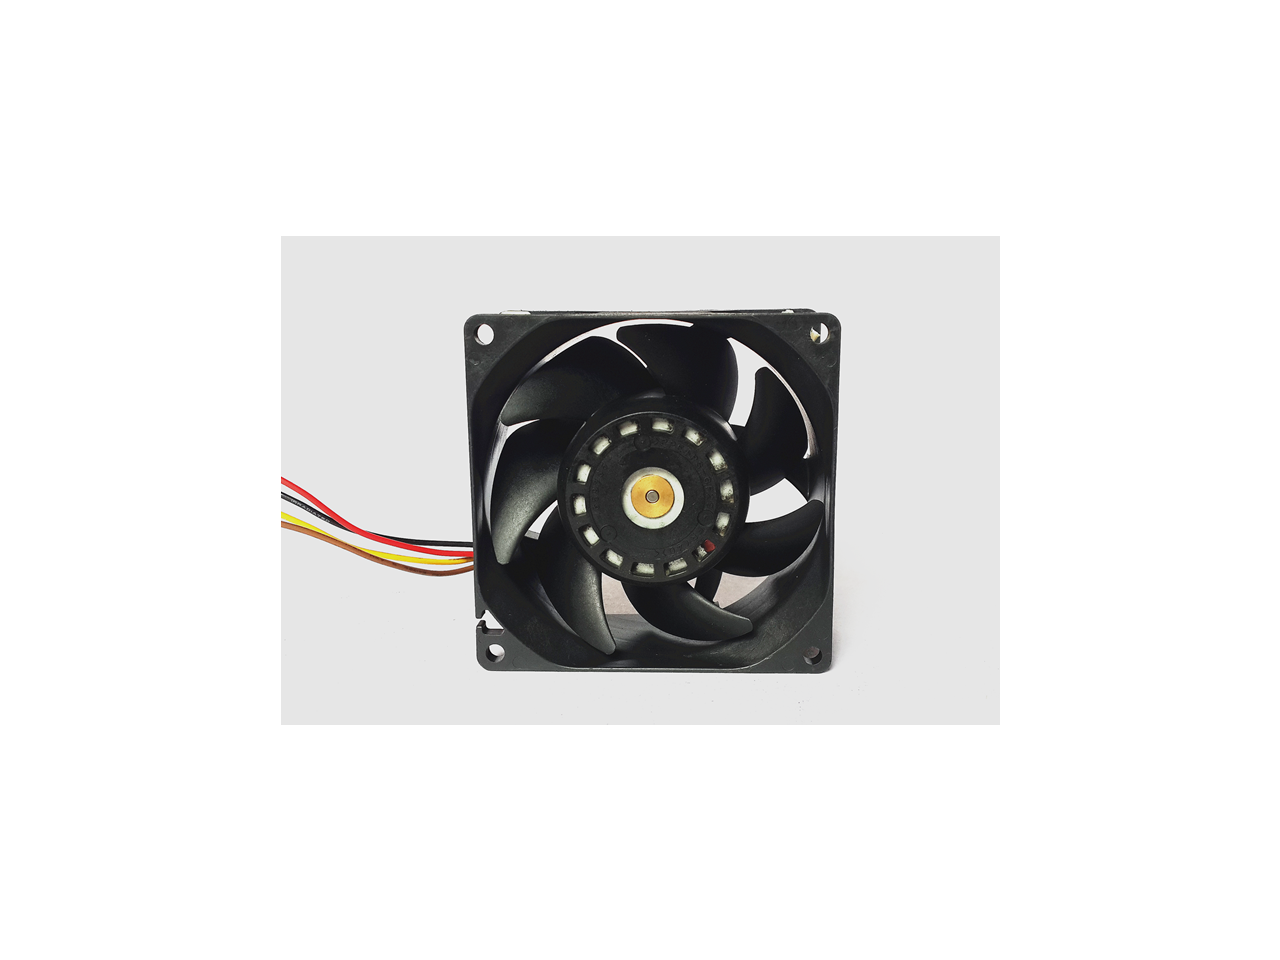 Original For Sanyo 9GV0812P1H031 8038 80mm 8cm DC 12V 3A high speed winds of fan violence